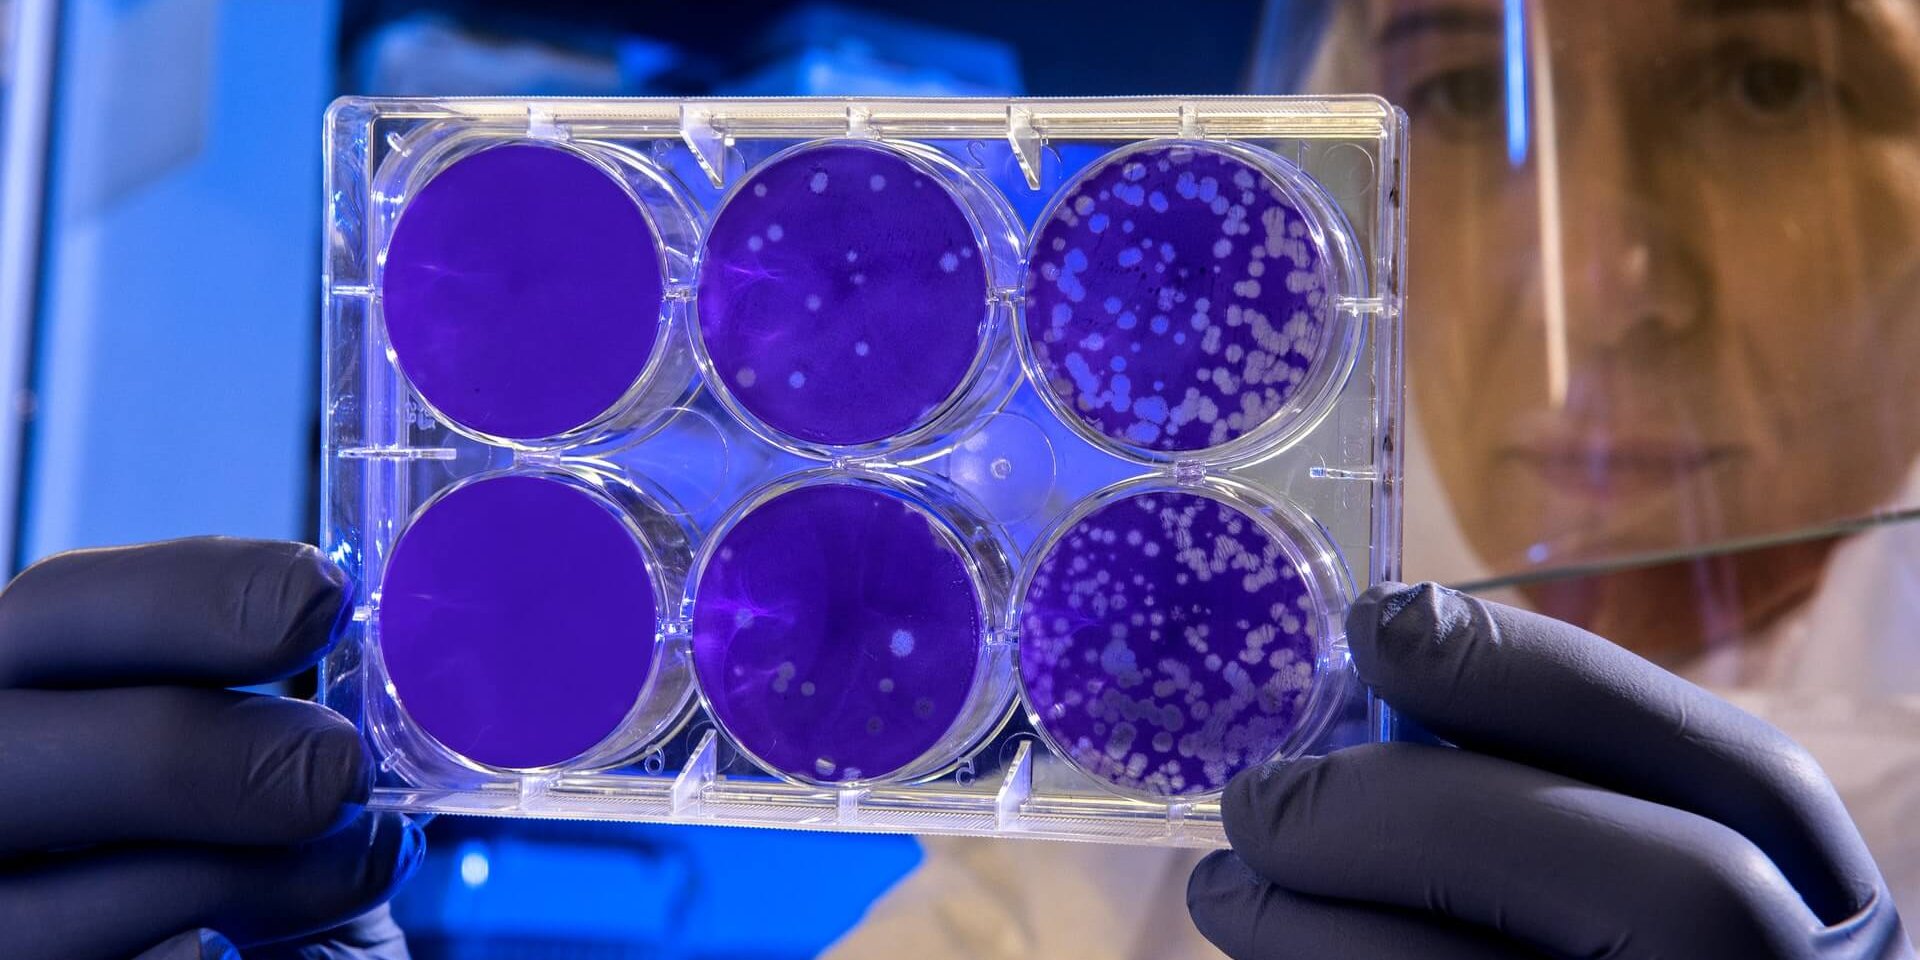 Scientist examines the result of a plaque assay, which is a test that allows scientists to count how many flu virus particles (virions) are in a mixture.